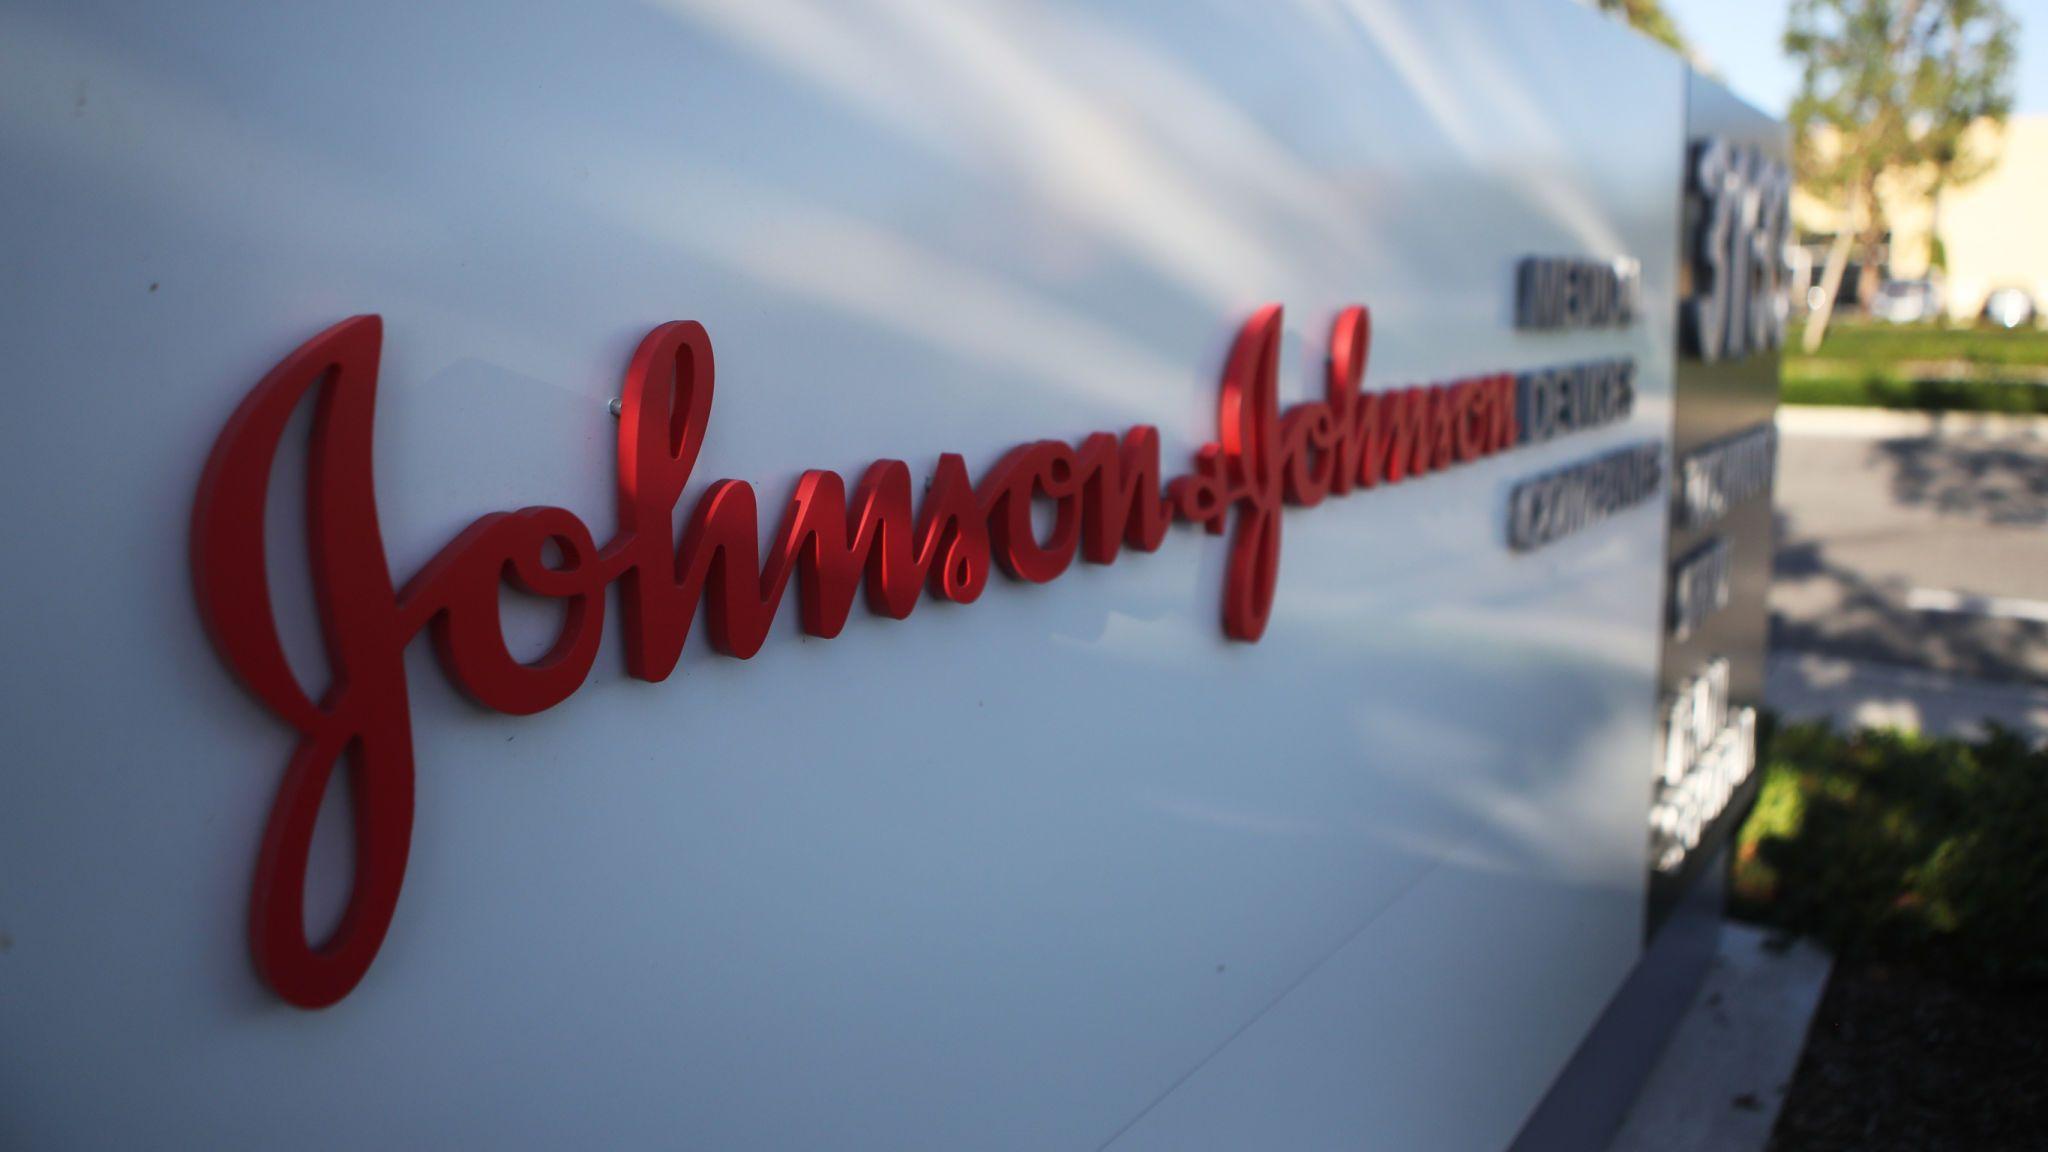 Johnson & Johnson will have to pay $ 4,7 billion to 22 women for asbestos talc damage